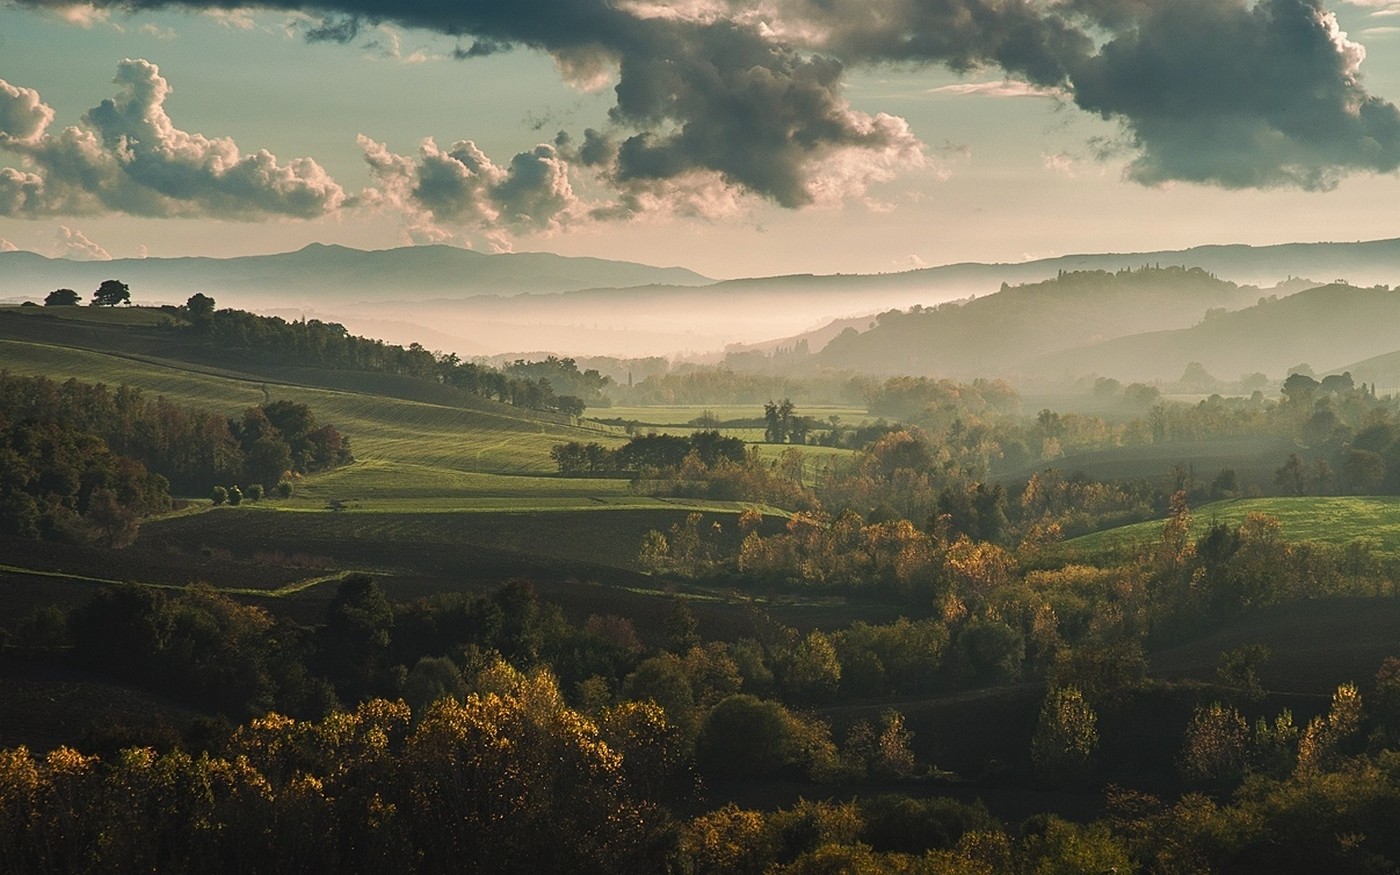 General 1400x875 nature landscape mist fall mountains hills trees Tuscany Italy clouds